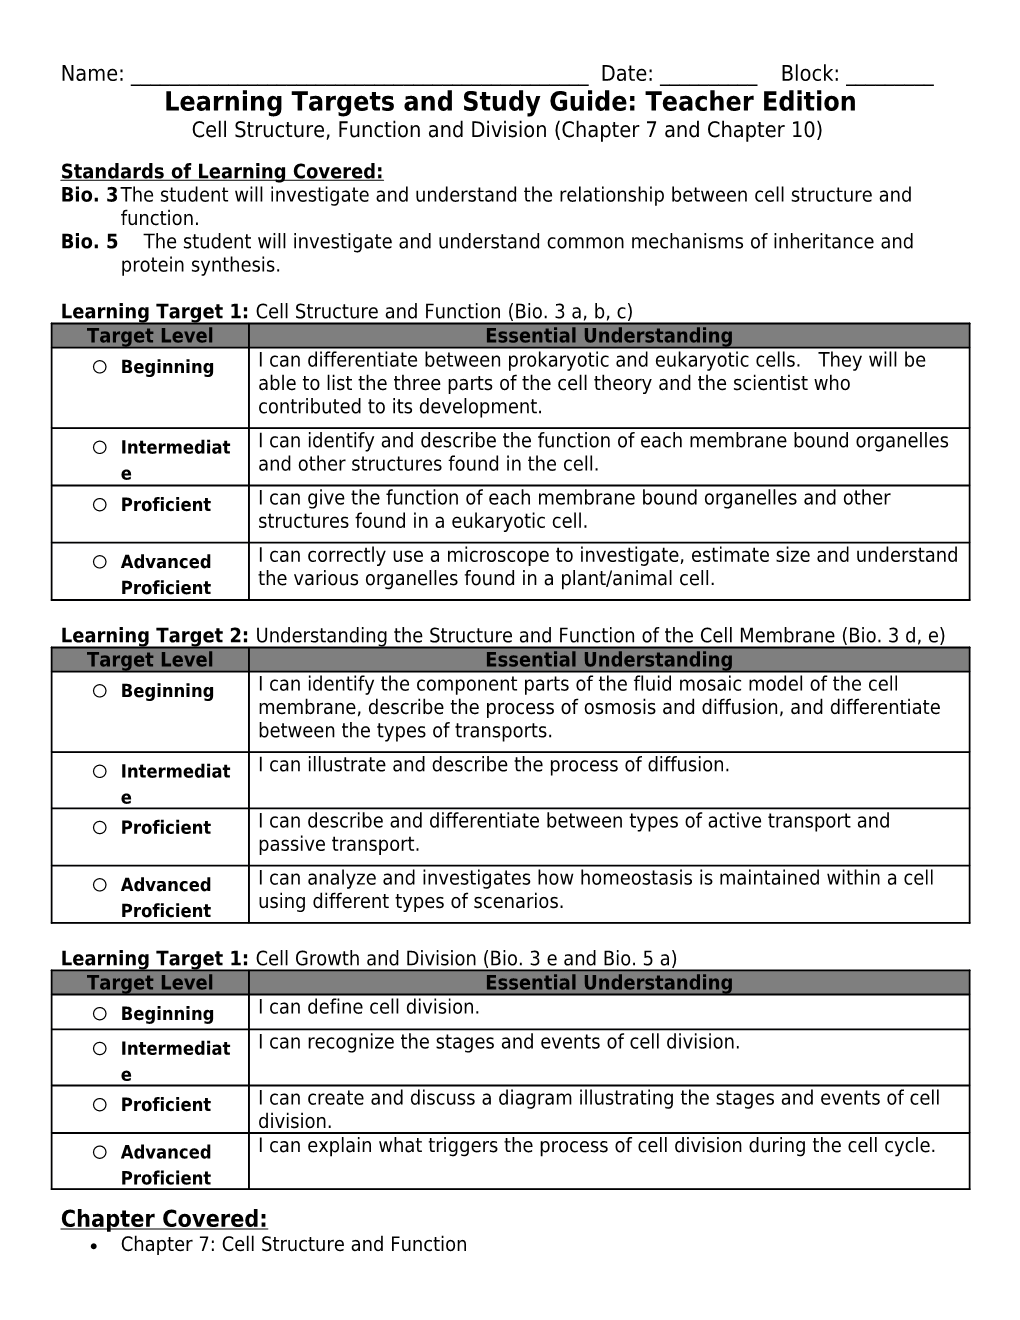 Learning Targets and Study Guide: Teacher Edition